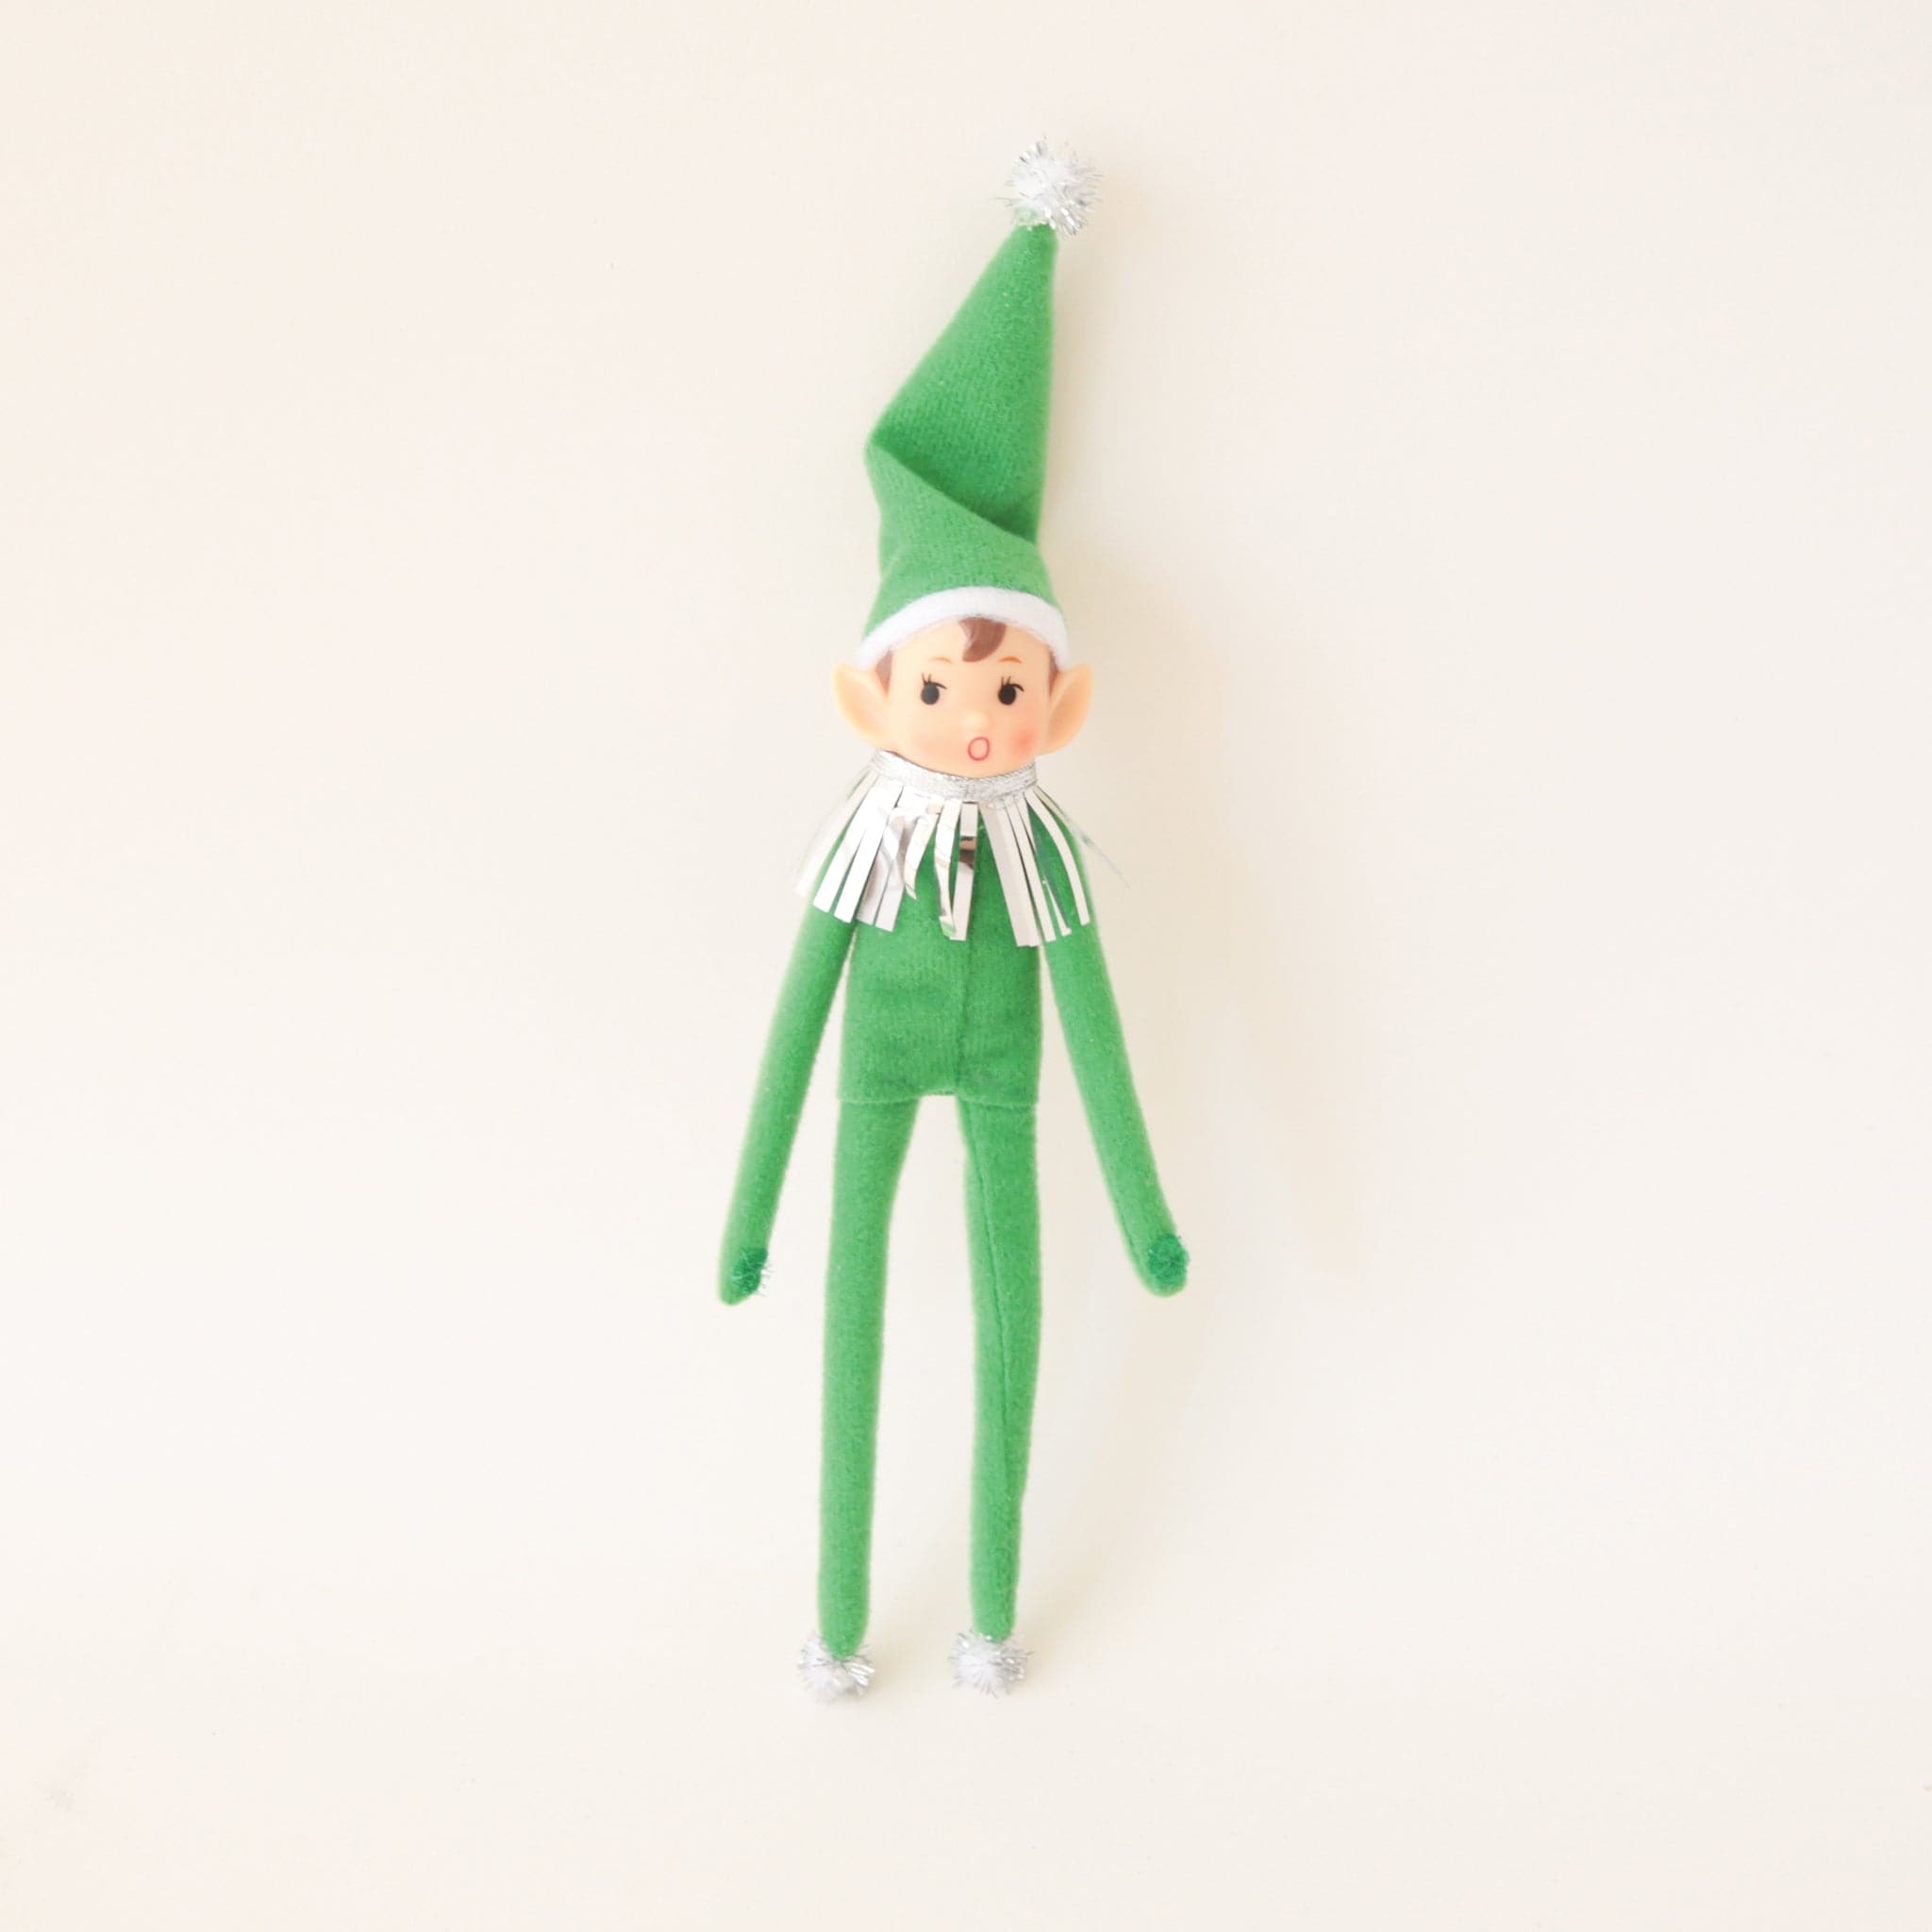 On a cream background is a green elf ornament with bendy arms and legs and a green loop for hanging.